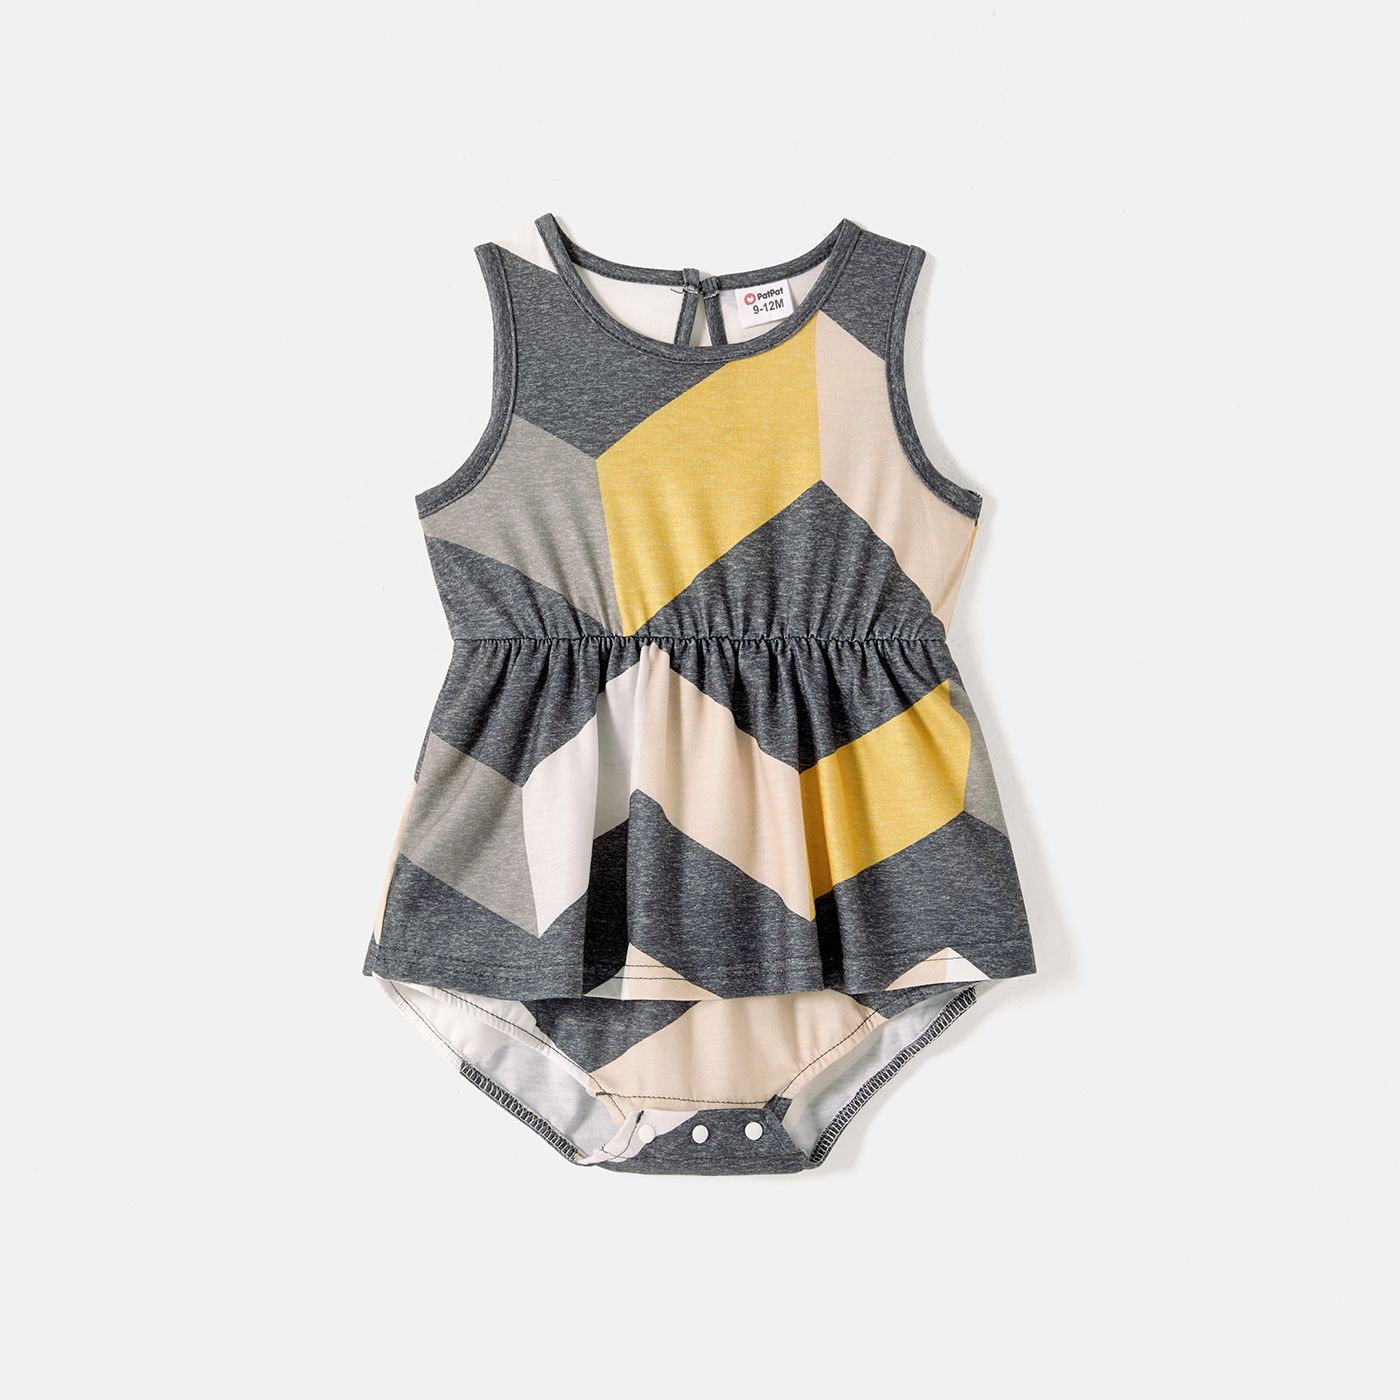 Family Matching Chevron Striped Halter Maxi Dresses And Short-sleeve Colorblock T-shirts Sets